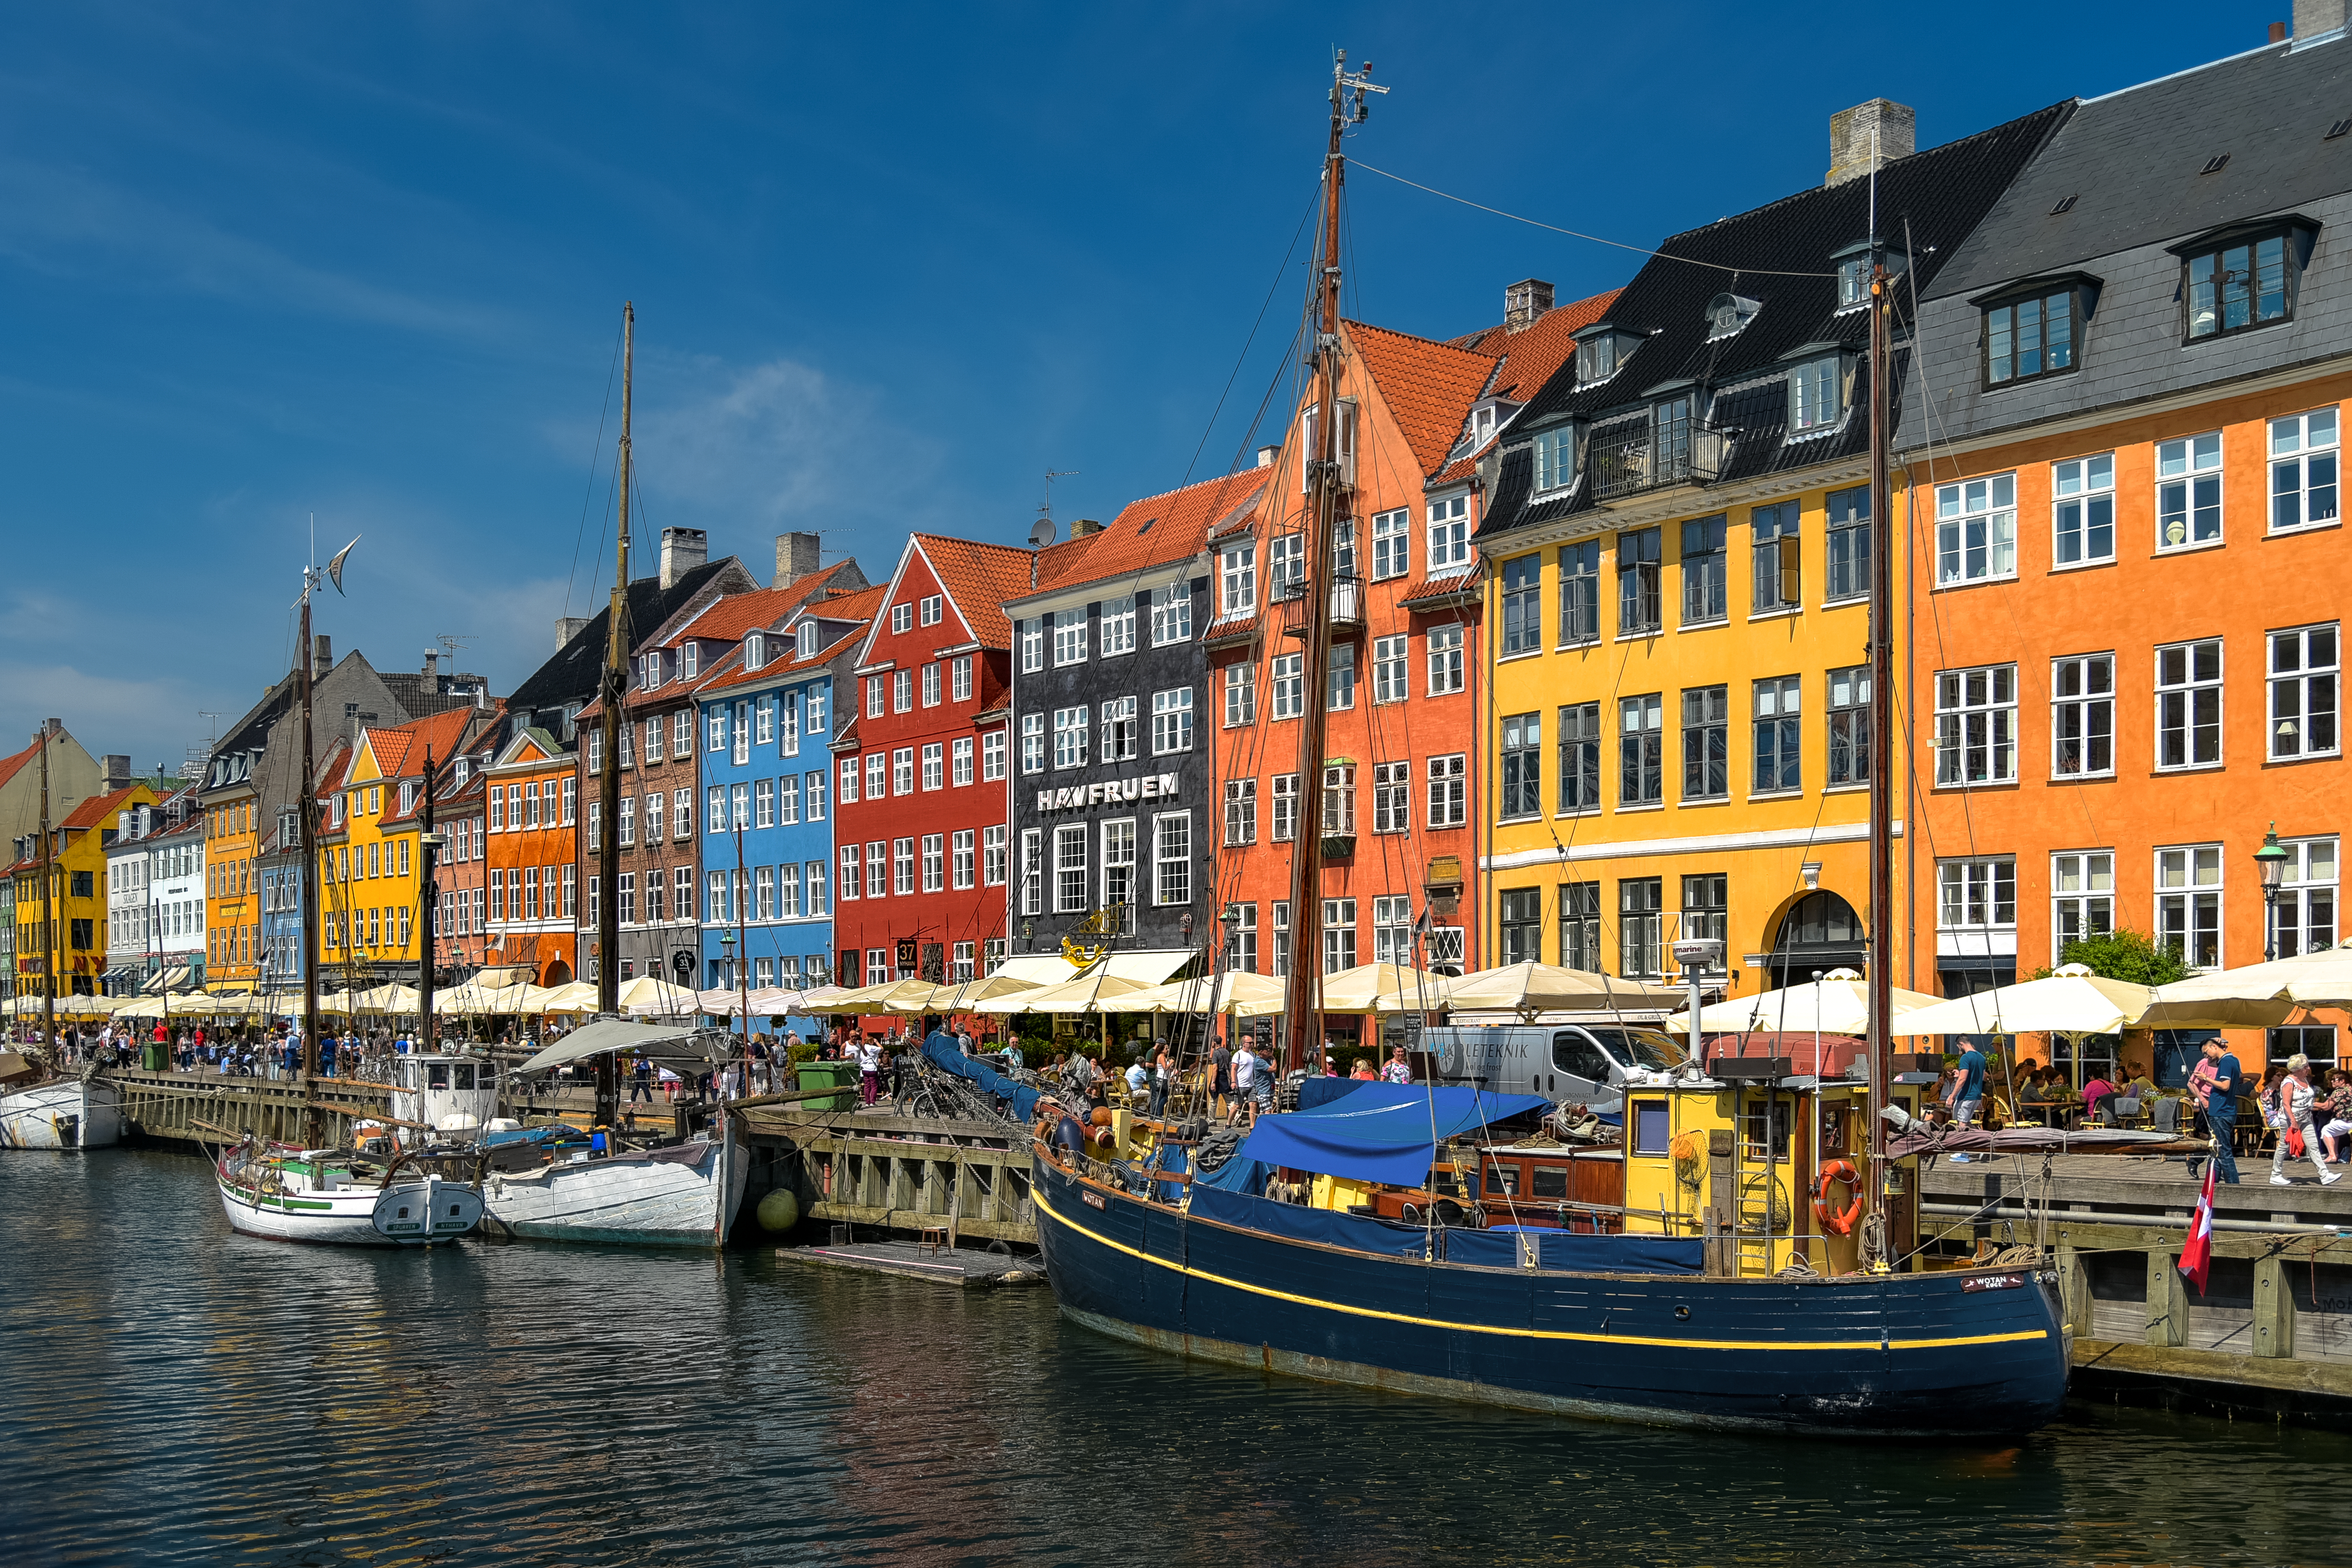 Denmark the safest country in the world – survey